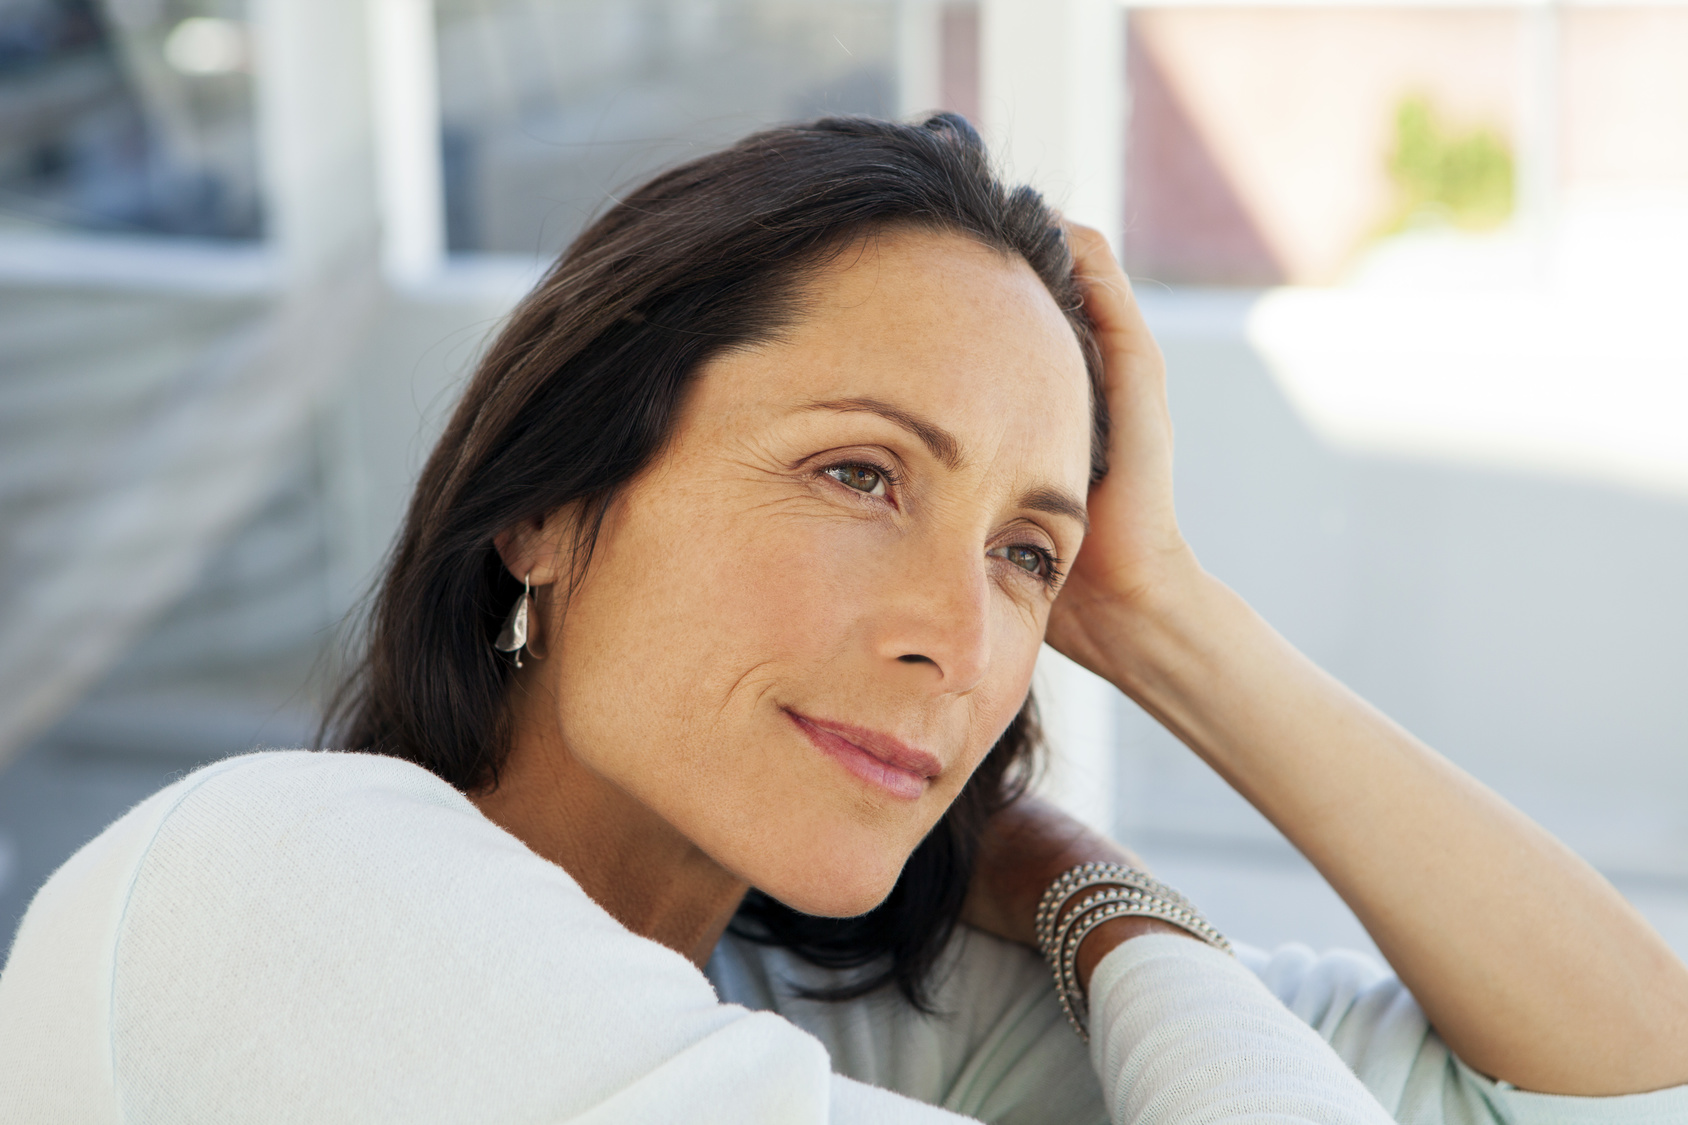 woman looking away - beautiful pensive middle aged person - close up portrait